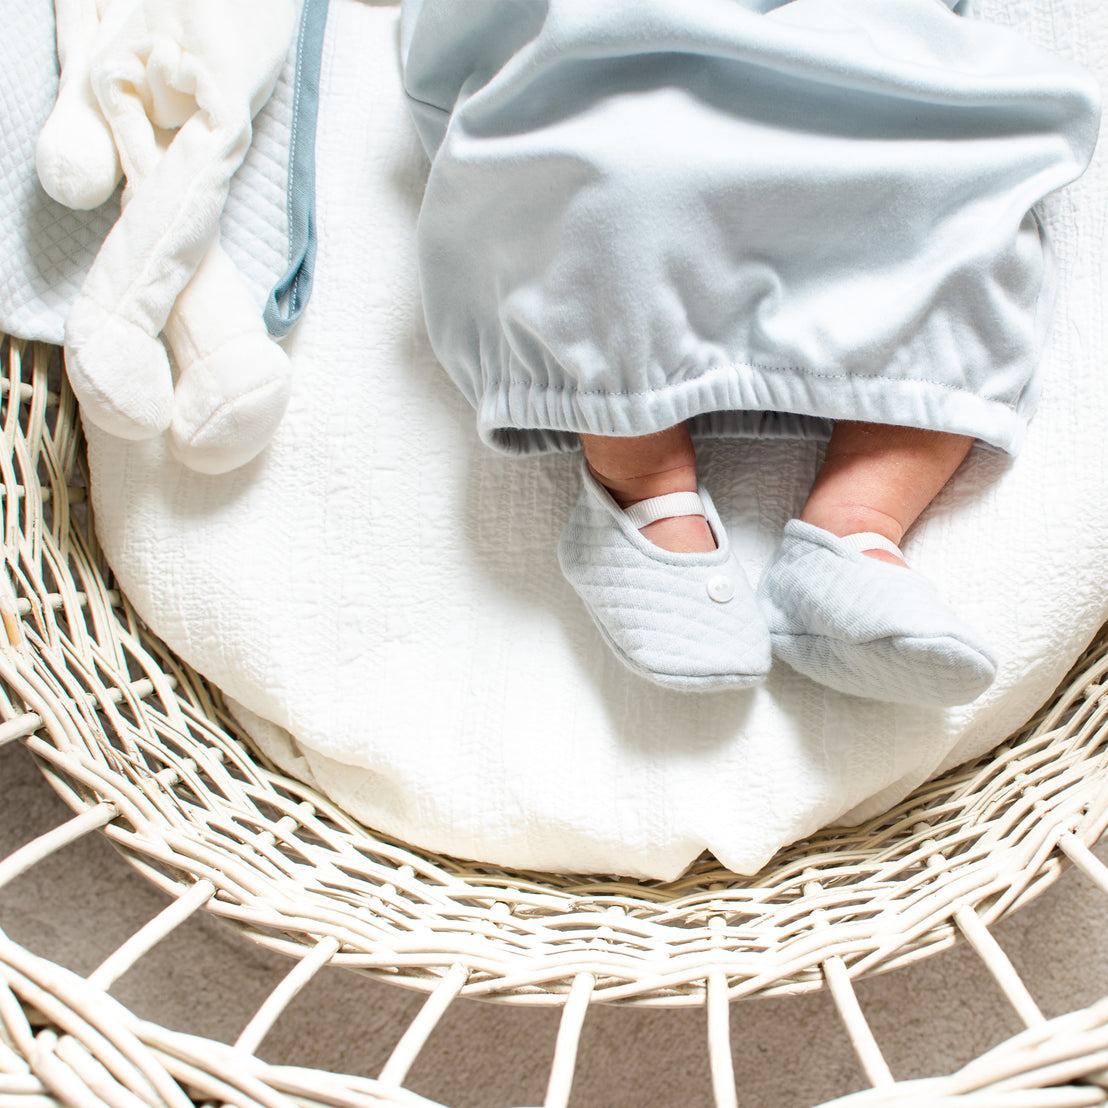 A newborn baby in a soft blue blanket with Aiden Quilted Booties lies asleep in a cozy, woven bassinet, demonstrating an upscale and serene nursery setting.